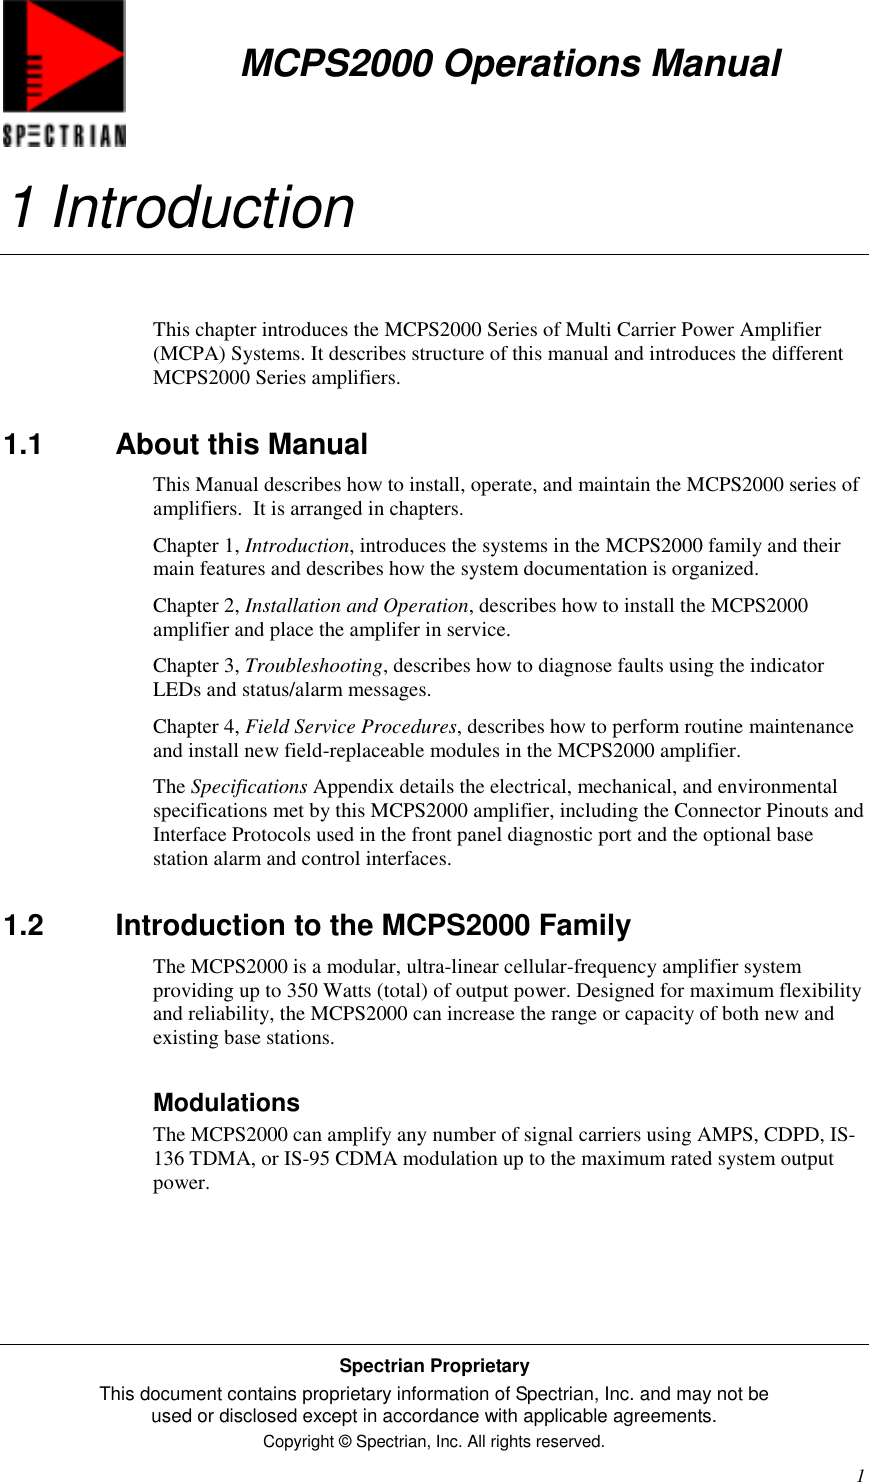 MCPS2000 Operations ManualSpectrian ProprietaryThis document contains proprietary information of Spectrian, Inc. and may not beused or disclosed except in accordance with applicable agreements.Copyright © Spectrian, Inc. All rights reserved.11 IntroductionThis chapter introduces the MCPS2000 Series of Multi Carrier Power Amplifier(MCPA) Systems. It describes structure of this manual and introduces the differentMCPS2000 Series amplifiers.1.1 About this ManualThis Manual describes how to install, operate, and maintain the MCPS2000 series ofamplifiers.  It is arranged in chapters.Chapter 1, Introduction, introduces the systems in the MCPS2000 family and theirmain features and describes how the system documentation is organized.Chapter 2, Installation and Operation, describes how to install the MCPS2000amplifier and place the amplifer in service.Chapter 3, Troubleshooting, describes how to diagnose faults using the indicatorLEDs and status/alarm messages.Chapter 4, Field Service Procedures, describes how to perform routine maintenanceand install new field-replaceable modules in the MCPS2000 amplifier.The Specifications Appendix details the electrical, mechanical, and environmentalspecifications met by this MCPS2000 amplifier, including the Connector Pinouts andInterface Protocols used in the front panel diagnostic port and the optional basestation alarm and control interfaces.1.2  Introduction to the MCPS2000 FamilyThe MCPS2000 is a modular, ultra-linear cellular-frequency amplifier systemproviding up to 350 Watts (total) of output power. Designed for maximum flexibilityand reliability, the MCPS2000 can increase the range or capacity of both new andexisting base stations.ModulationsThe MCPS2000 can amplify any number of signal carriers using AMPS, CDPD, IS-136 TDMA, or IS-95 CDMA modulation up to the maximum rated system outputpower.